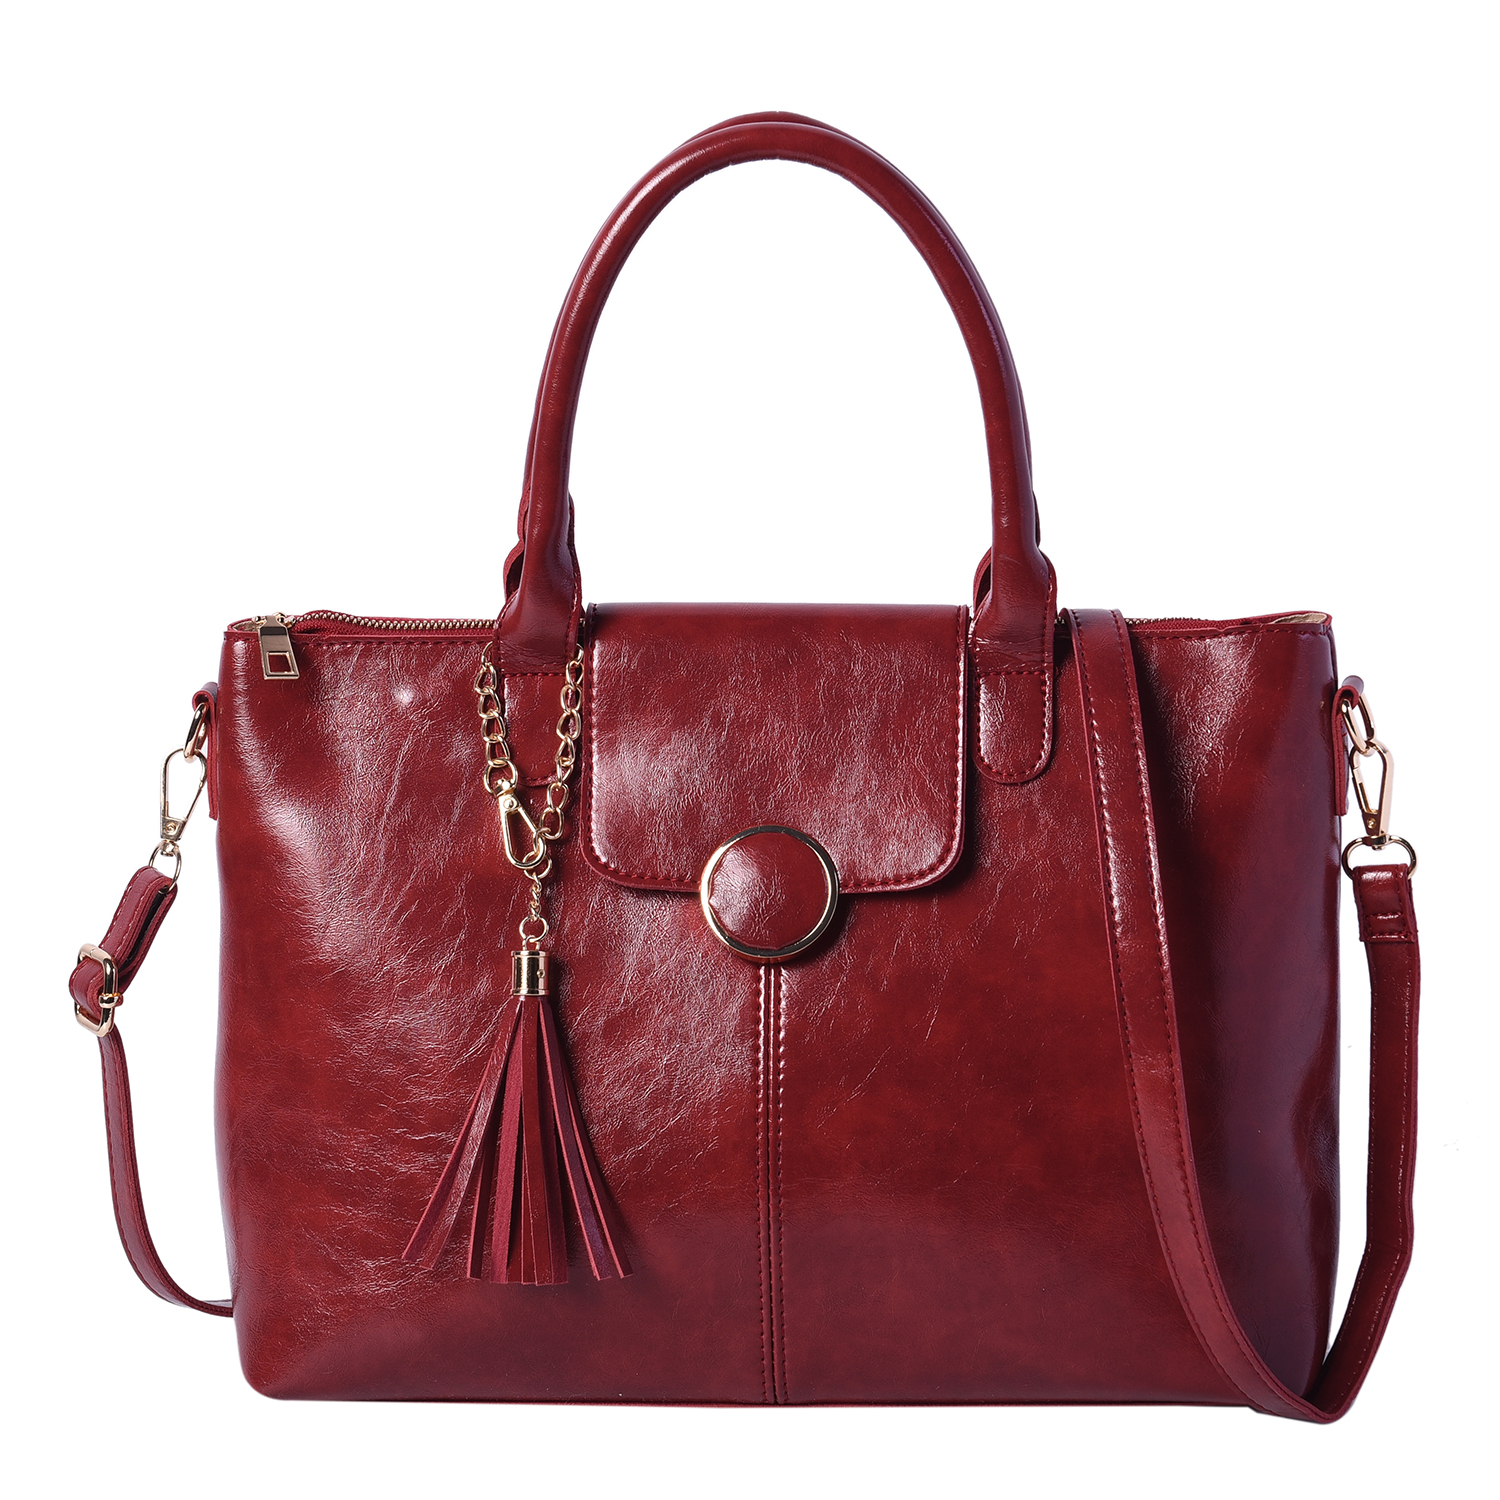 Solid Red Tote Bag (35x12x26cm) with Adjustable Shoulder Strap and Tassel